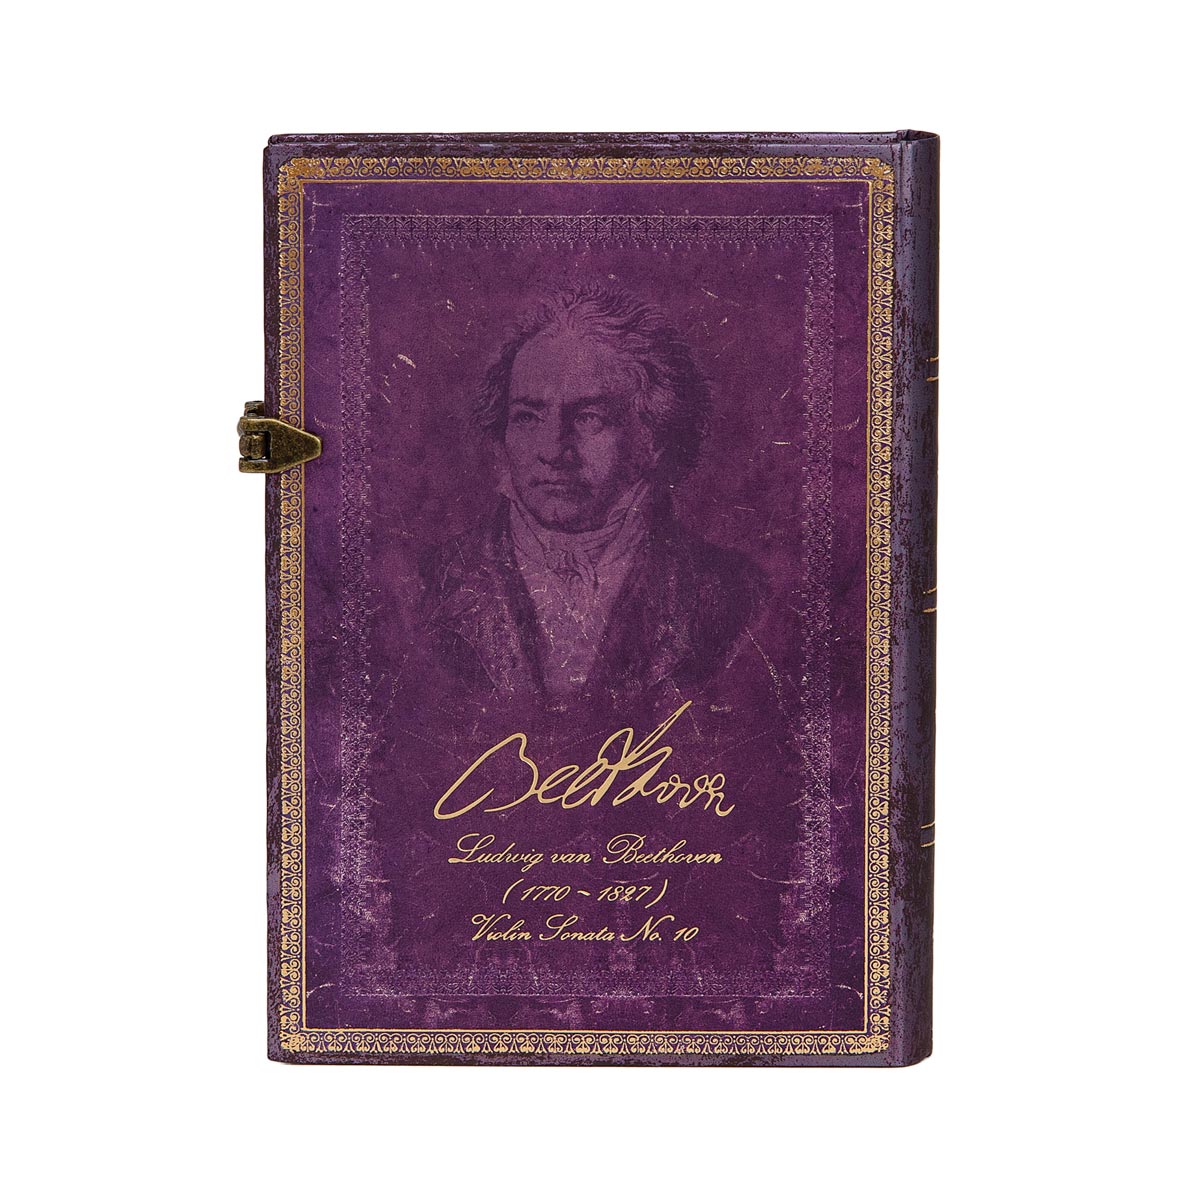 Paperblanks Beethoven's 250th Bday Midi 5x7 Inch Journal